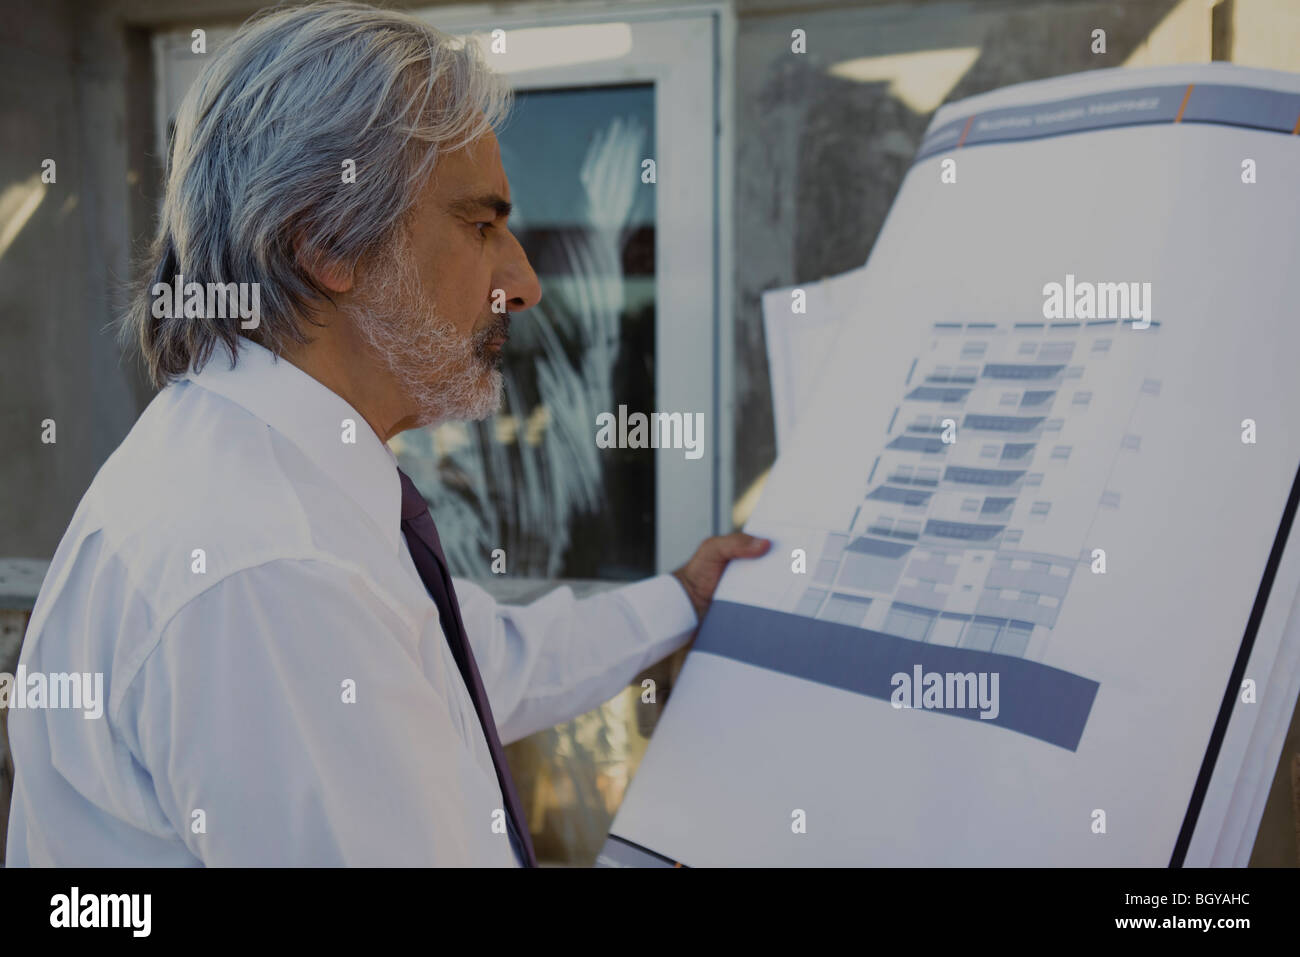 Architect reviewing blueprint Stock Photo